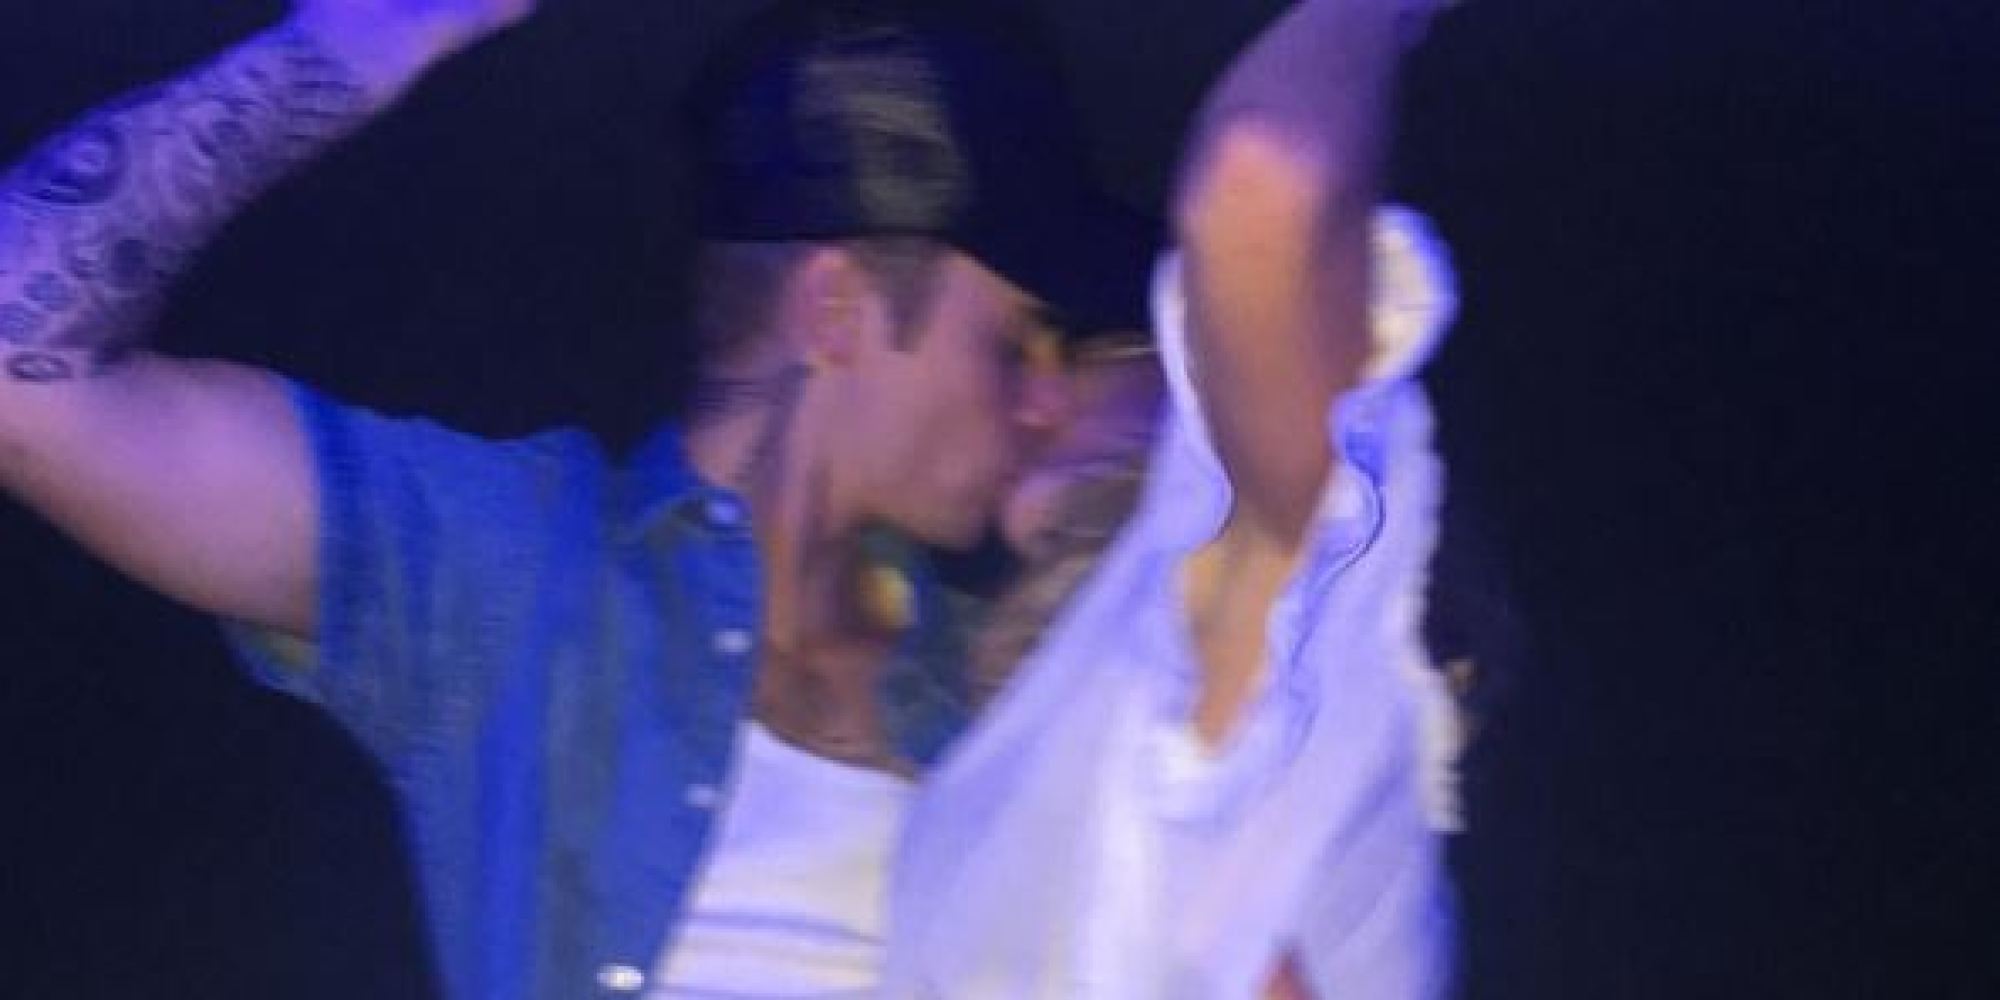 Justin Bieber And Hailey Baldwin Confirm Romance With Instagram Picture Which Shows Them 